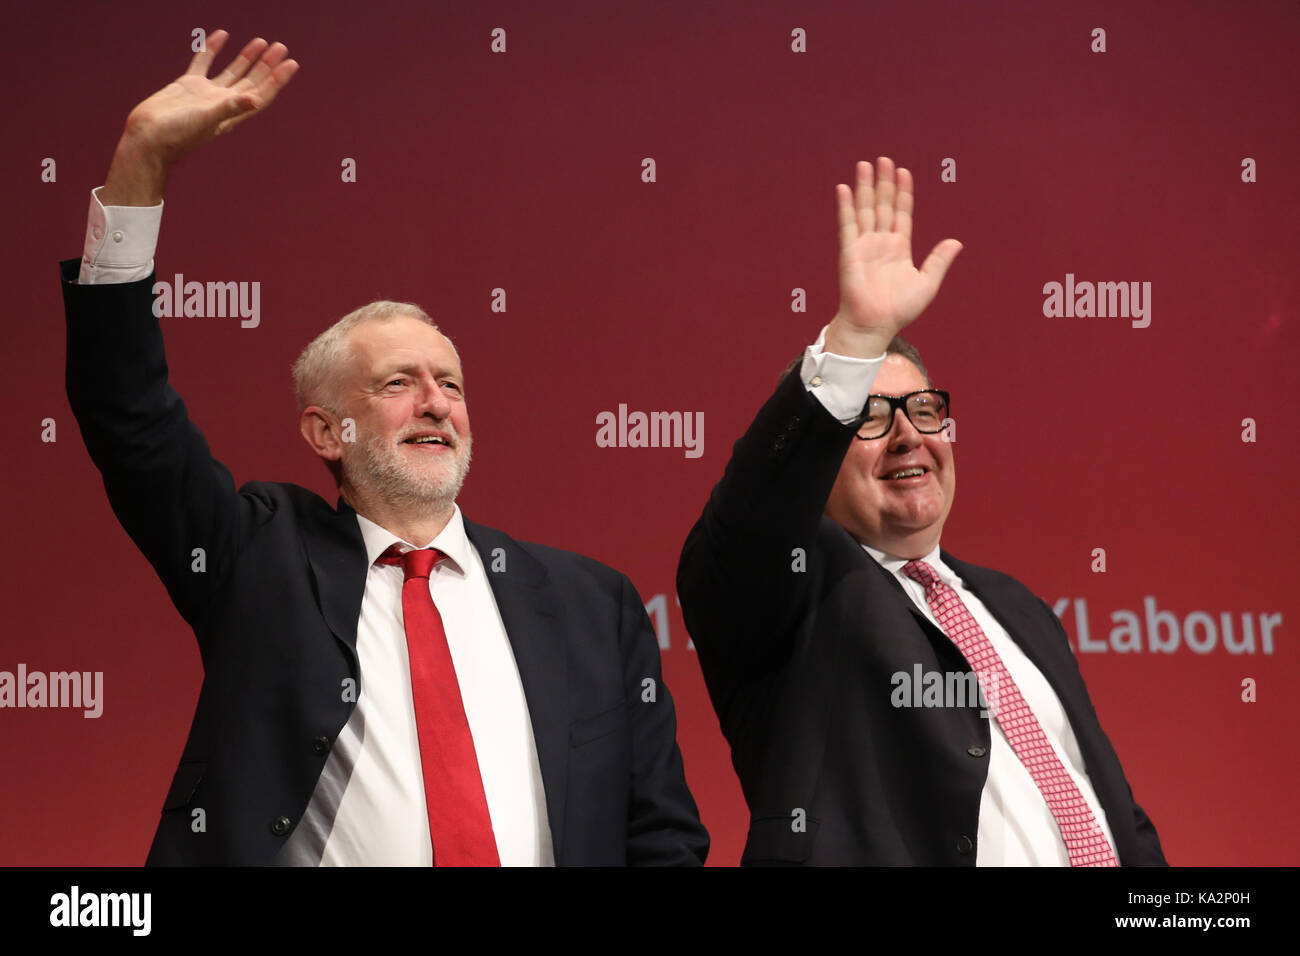 Brighton, UK. 24th September, 2017. Jeremy Corbyn, leader of Britain's opposition Labour party and Deputy Tom Watson wave during the annual Labour Party Conference in Brighton, UK Sunday, September 24, 2017. Photograph : Credit: Luke MacGregor/Alamy Live News Stock Photo